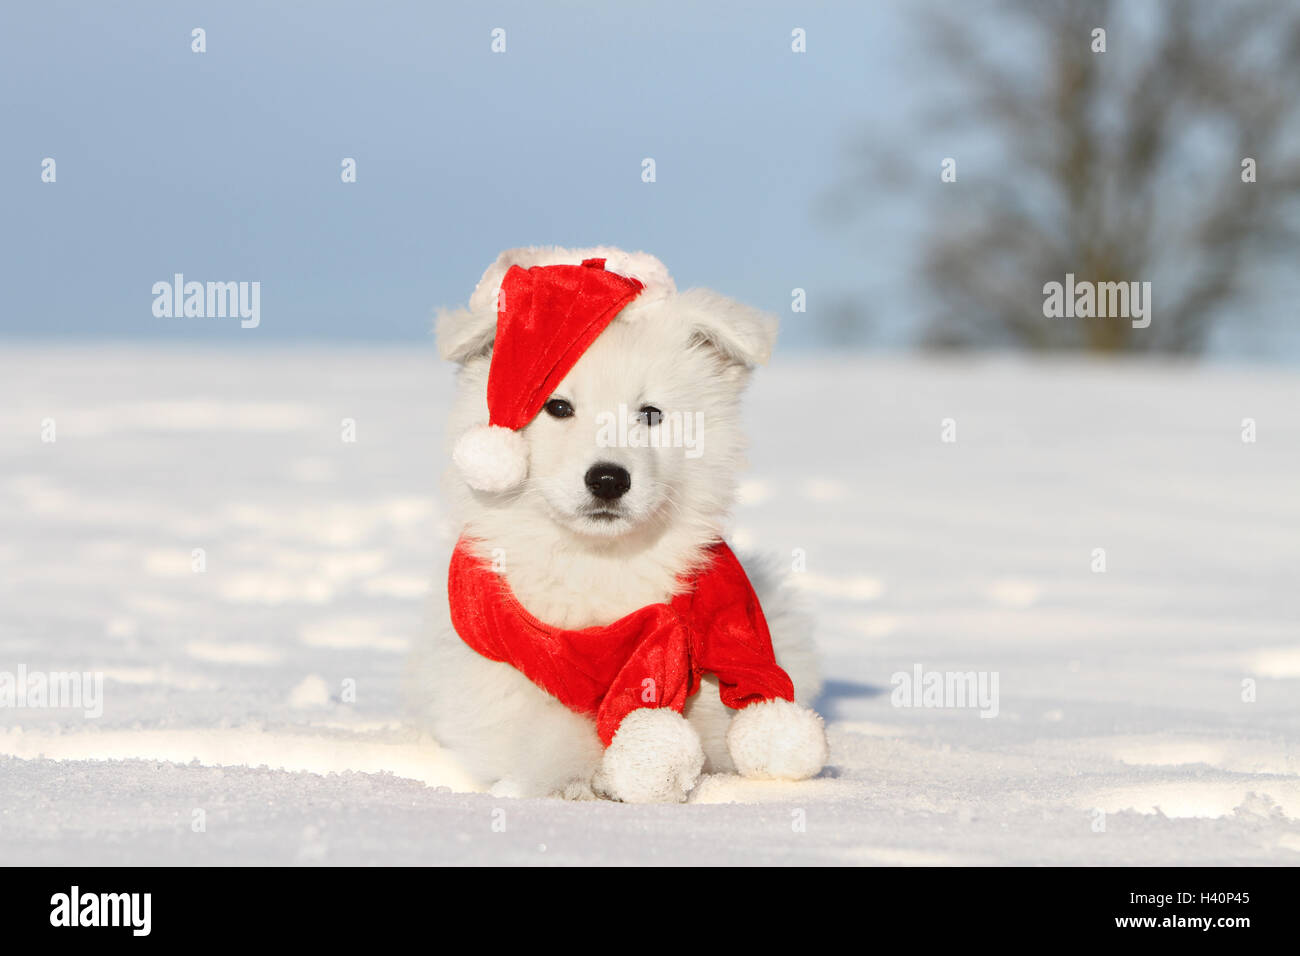 Berger Blanc Suisse / Chien Berger Blanc Suisse chiot dans Christmas hat lying in snow Banque D'Images